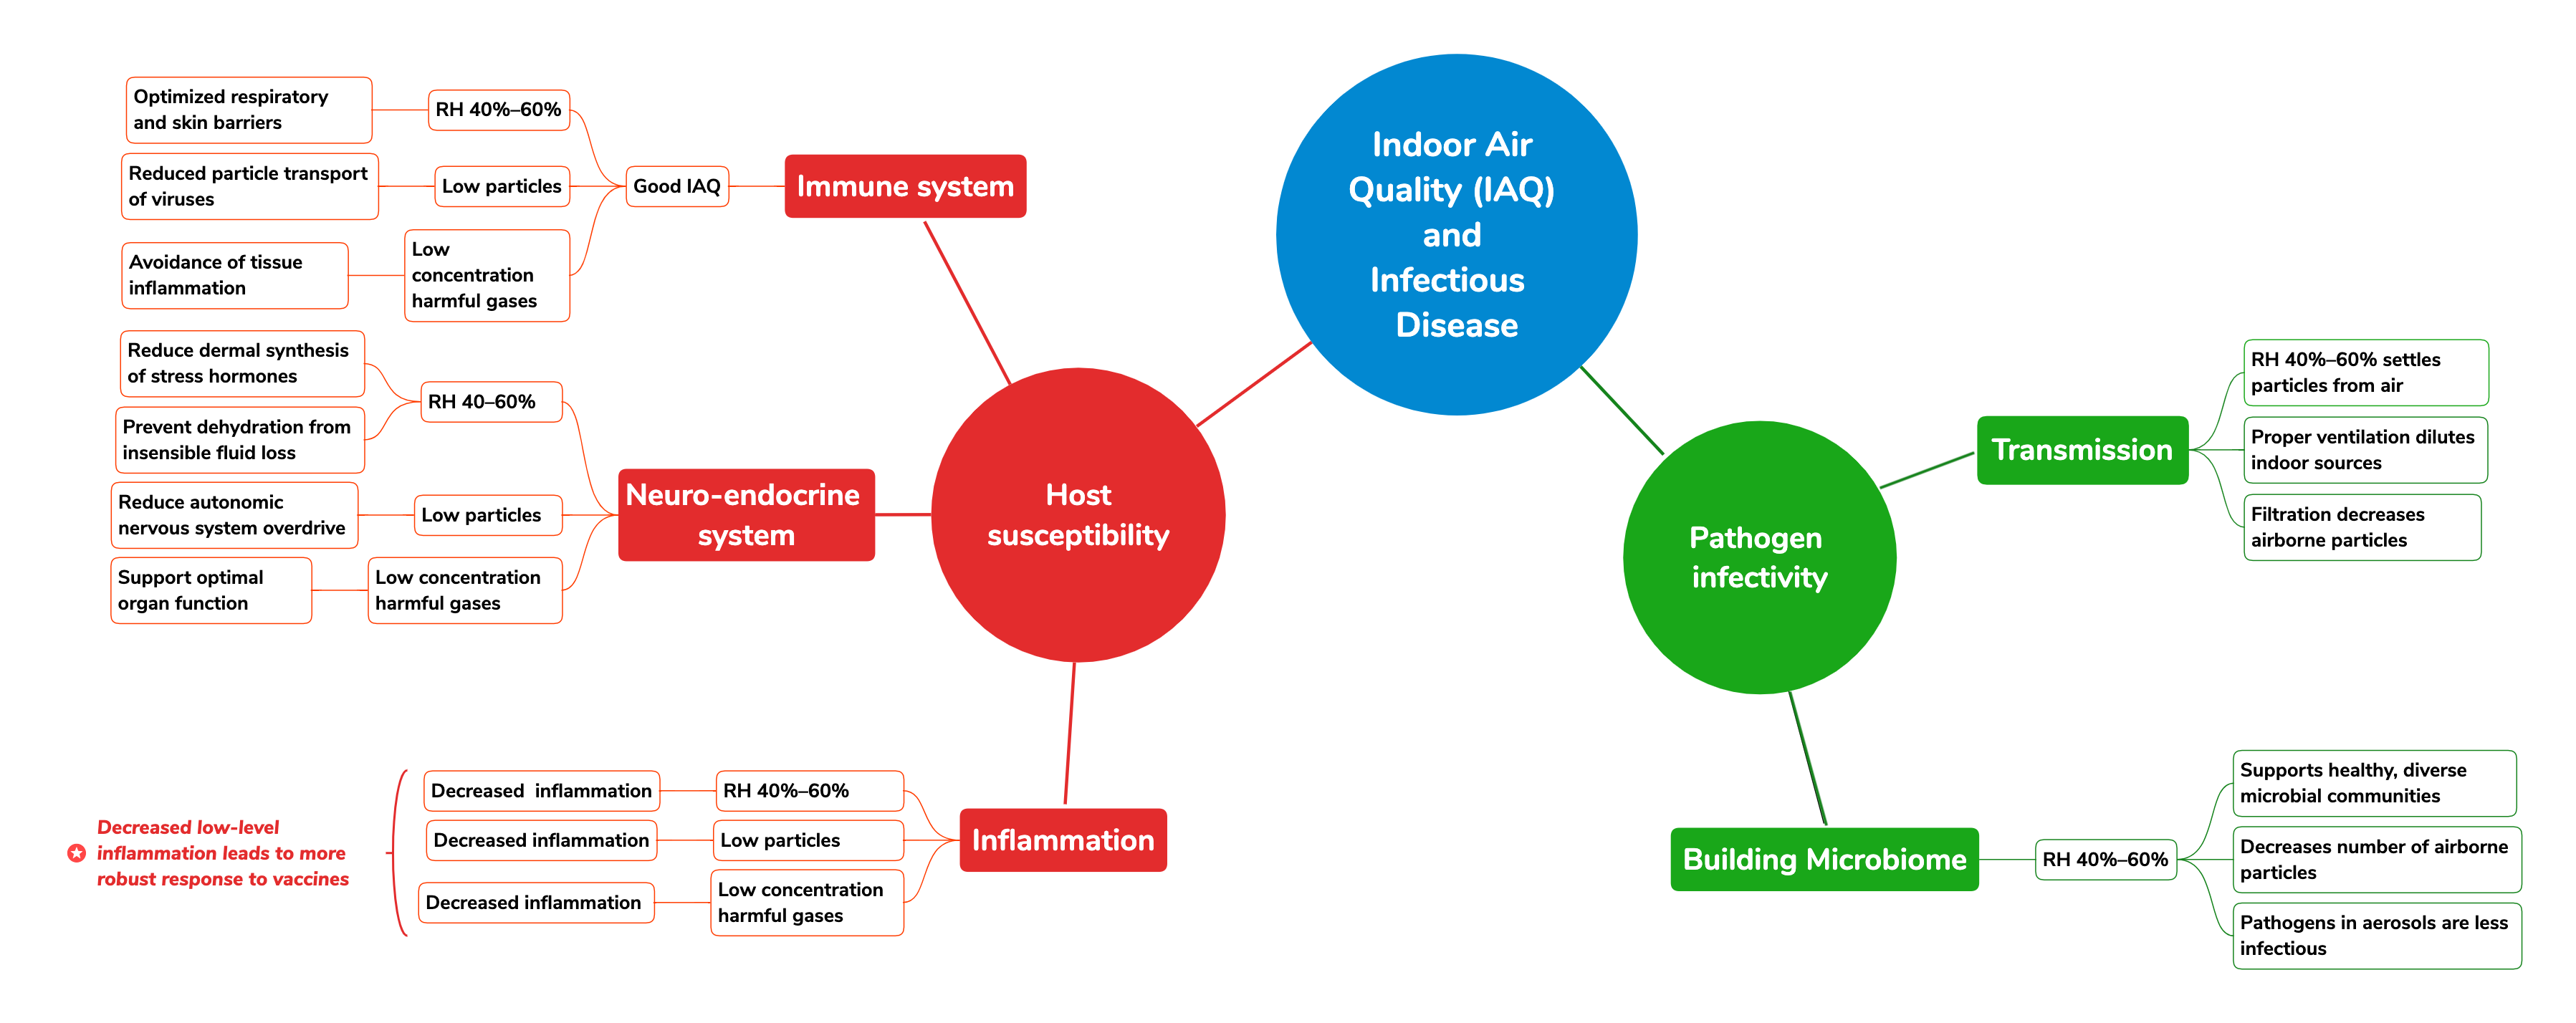 Indoor-Air-Quality-(IAQ)-and-Infectious--Disease.png